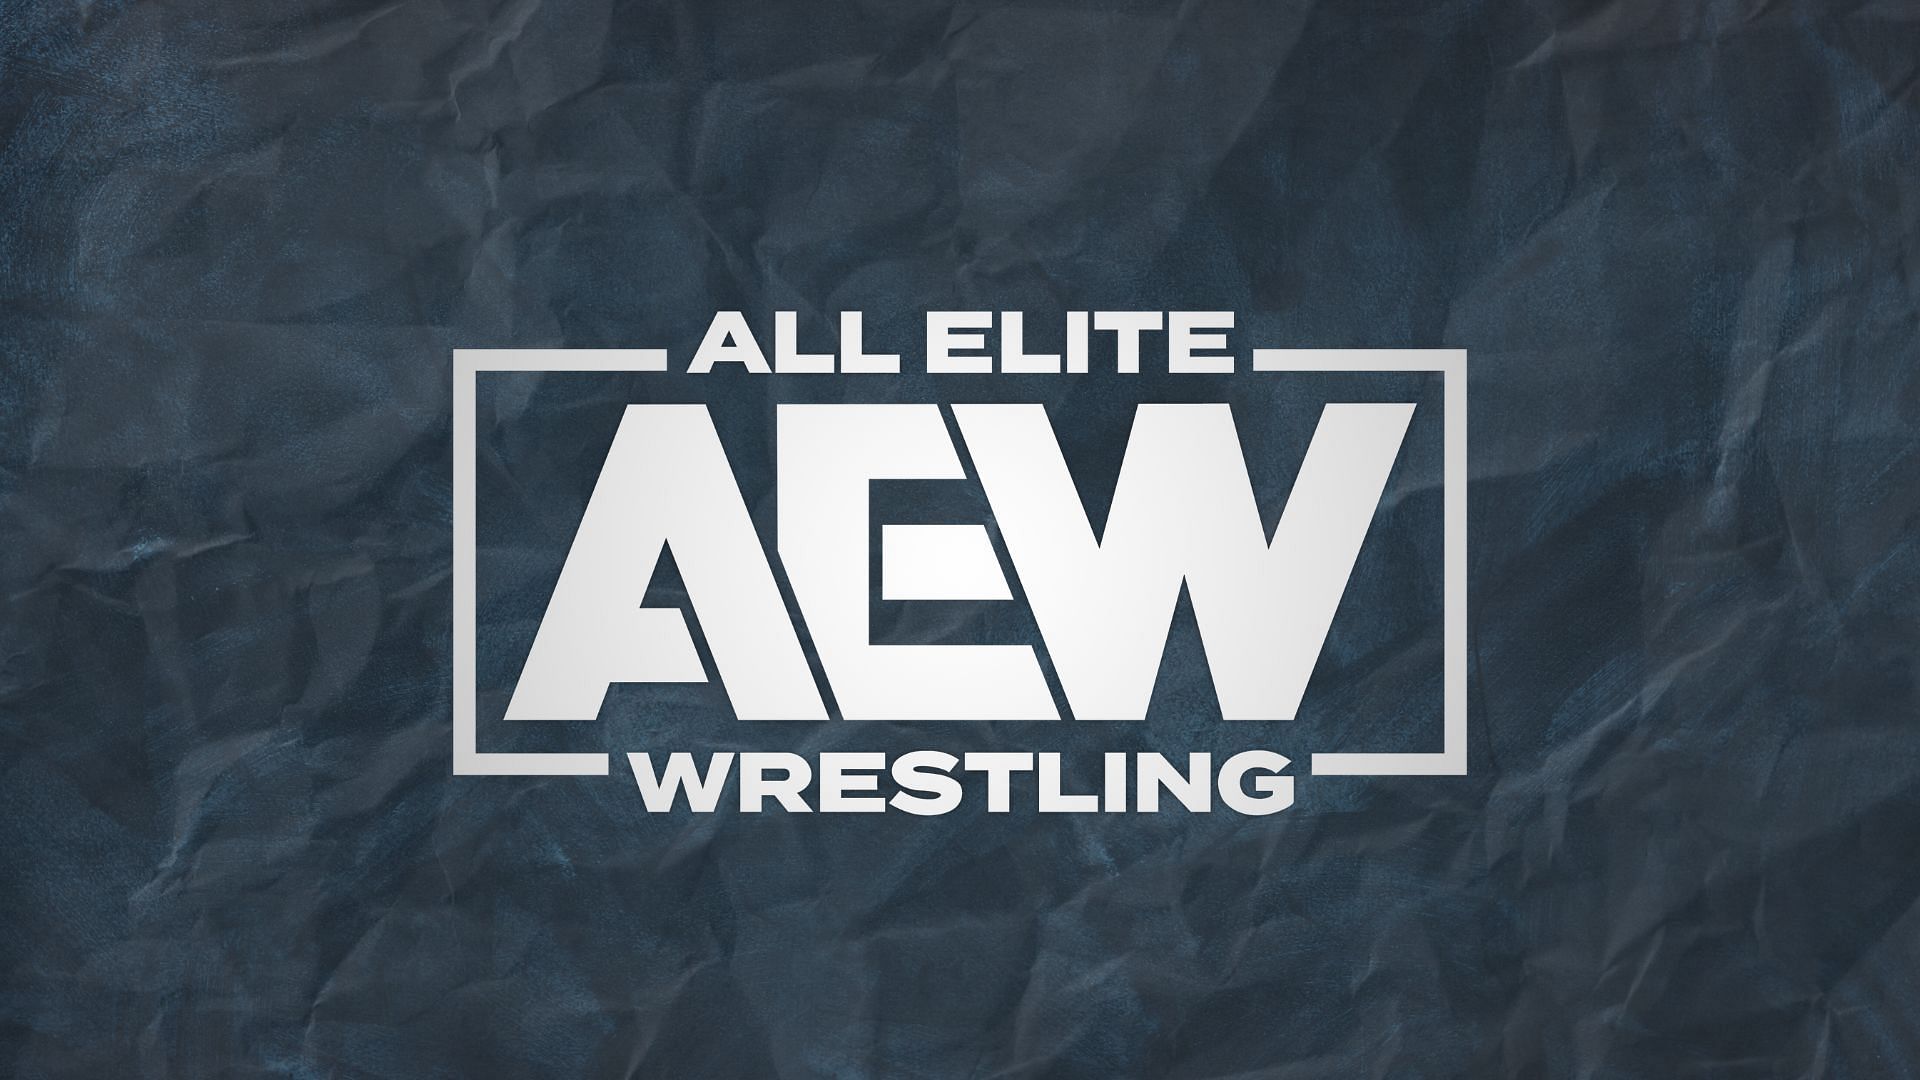 All Elite Wrestling produces three weekly TV shows